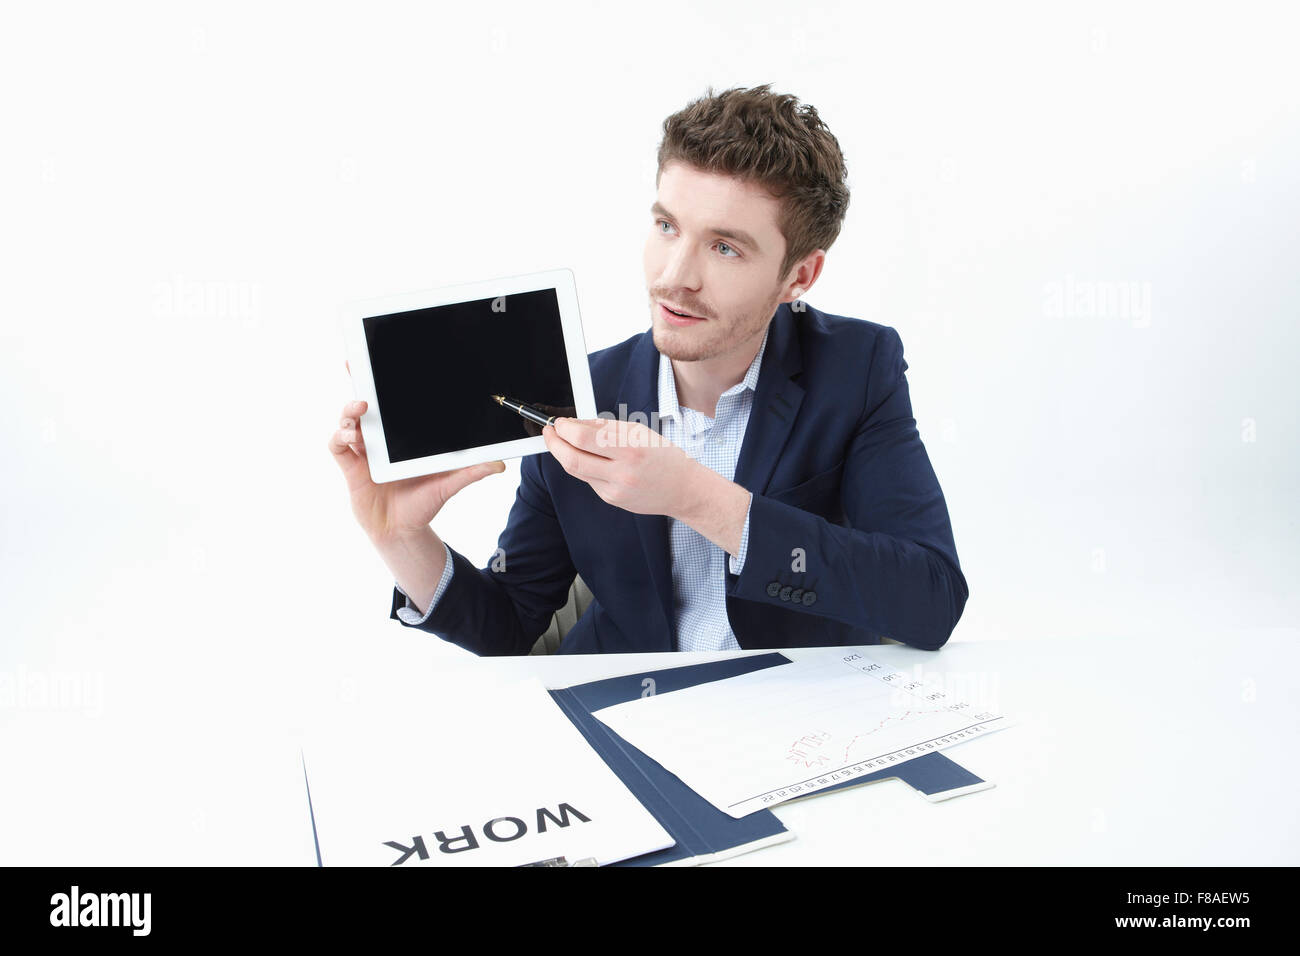 Businessman holding tablet PC and pointing it with a pen Stock Photo